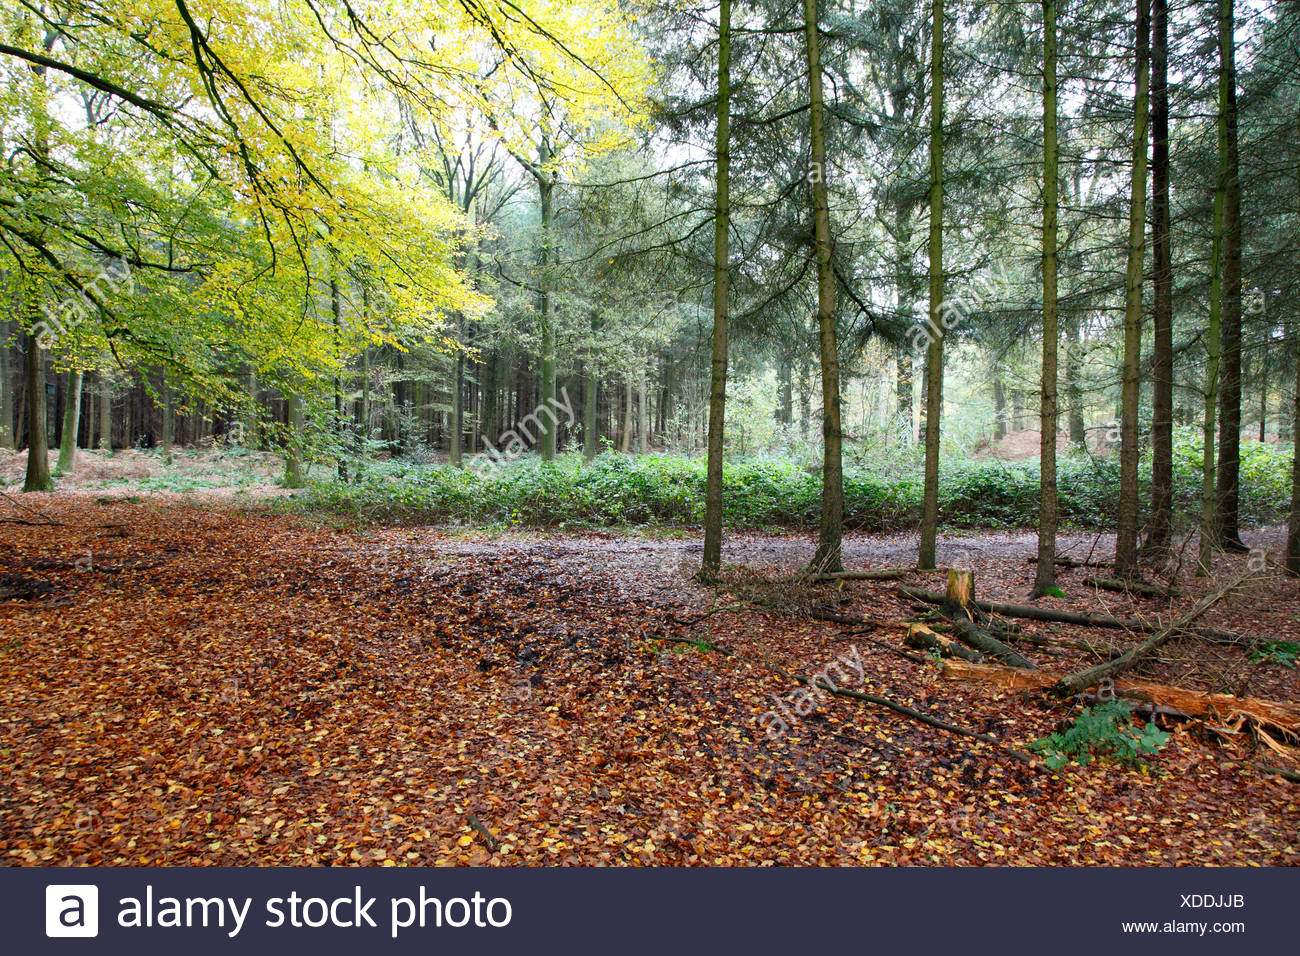 Nature development, cultivated forest, autumn, The Netherlands Stock Photo  - Alamy